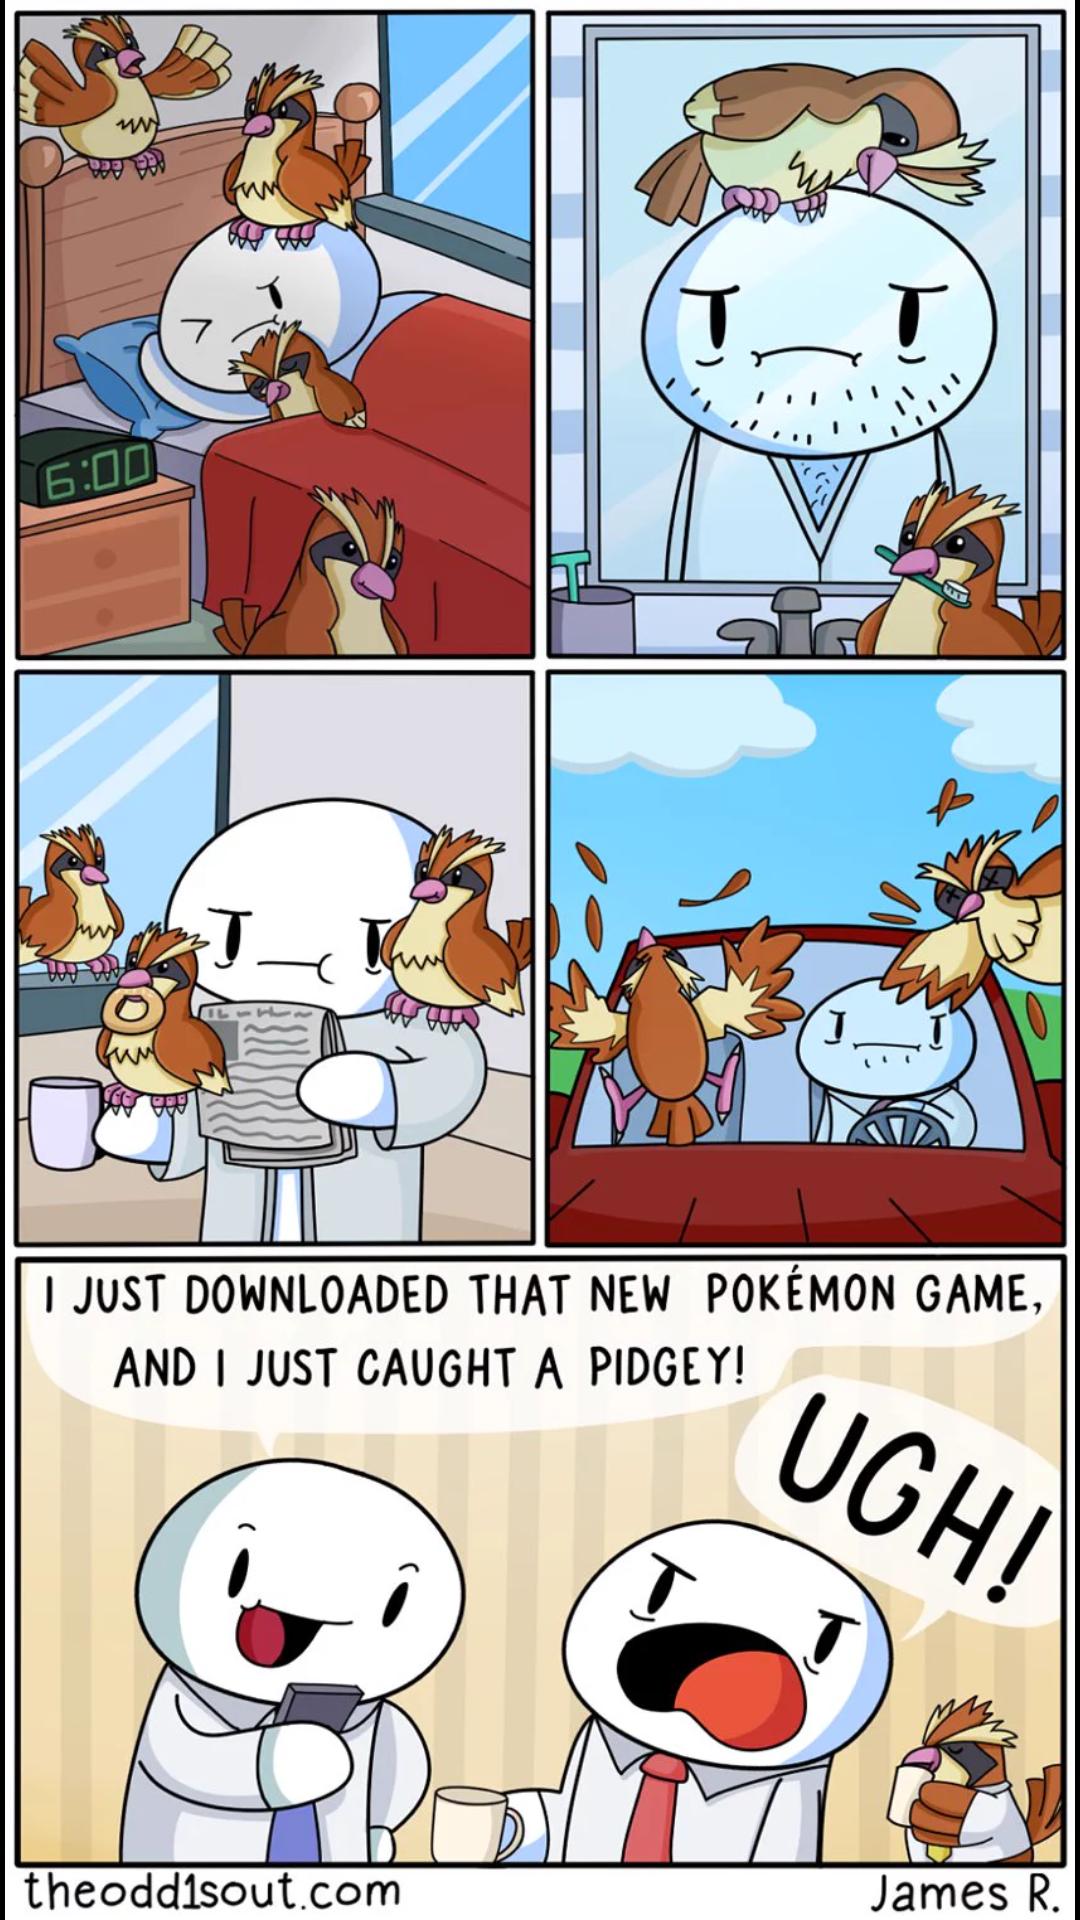 theodd1sout comics pokemon - Vol I Just Downloaded That New Pokmon Game, And I Just Caught A Pidgey! Ugh! theodd1sout.com James R.